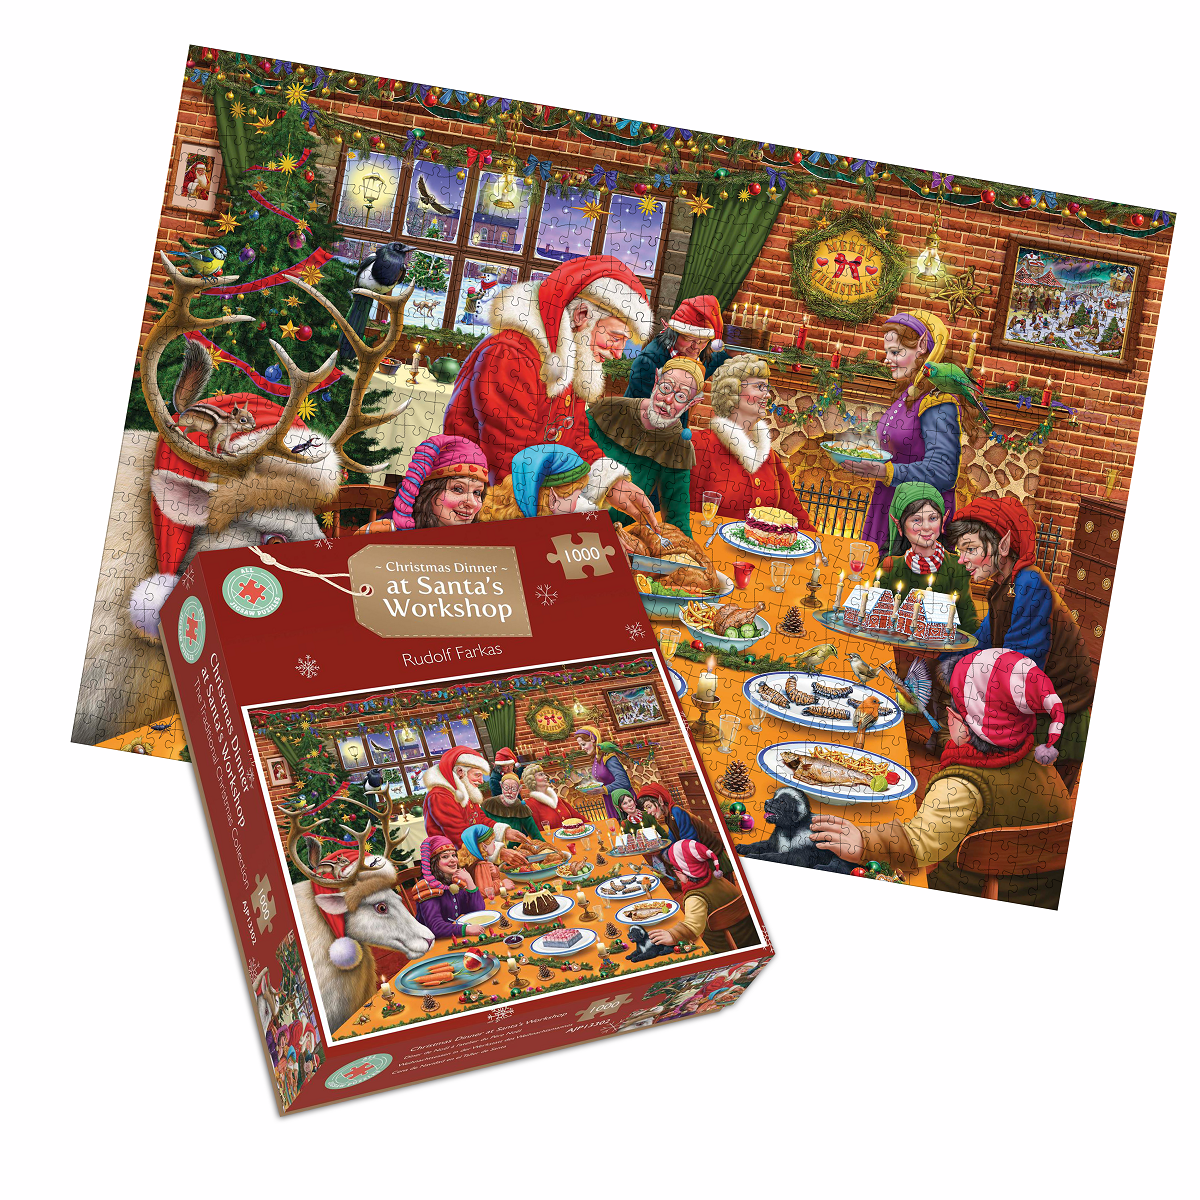 Ravensburger Games & Puzzles for the Whole Family!  Christmas jigsaw  puzzles, Christmas jigsaws, Christmas puzzle